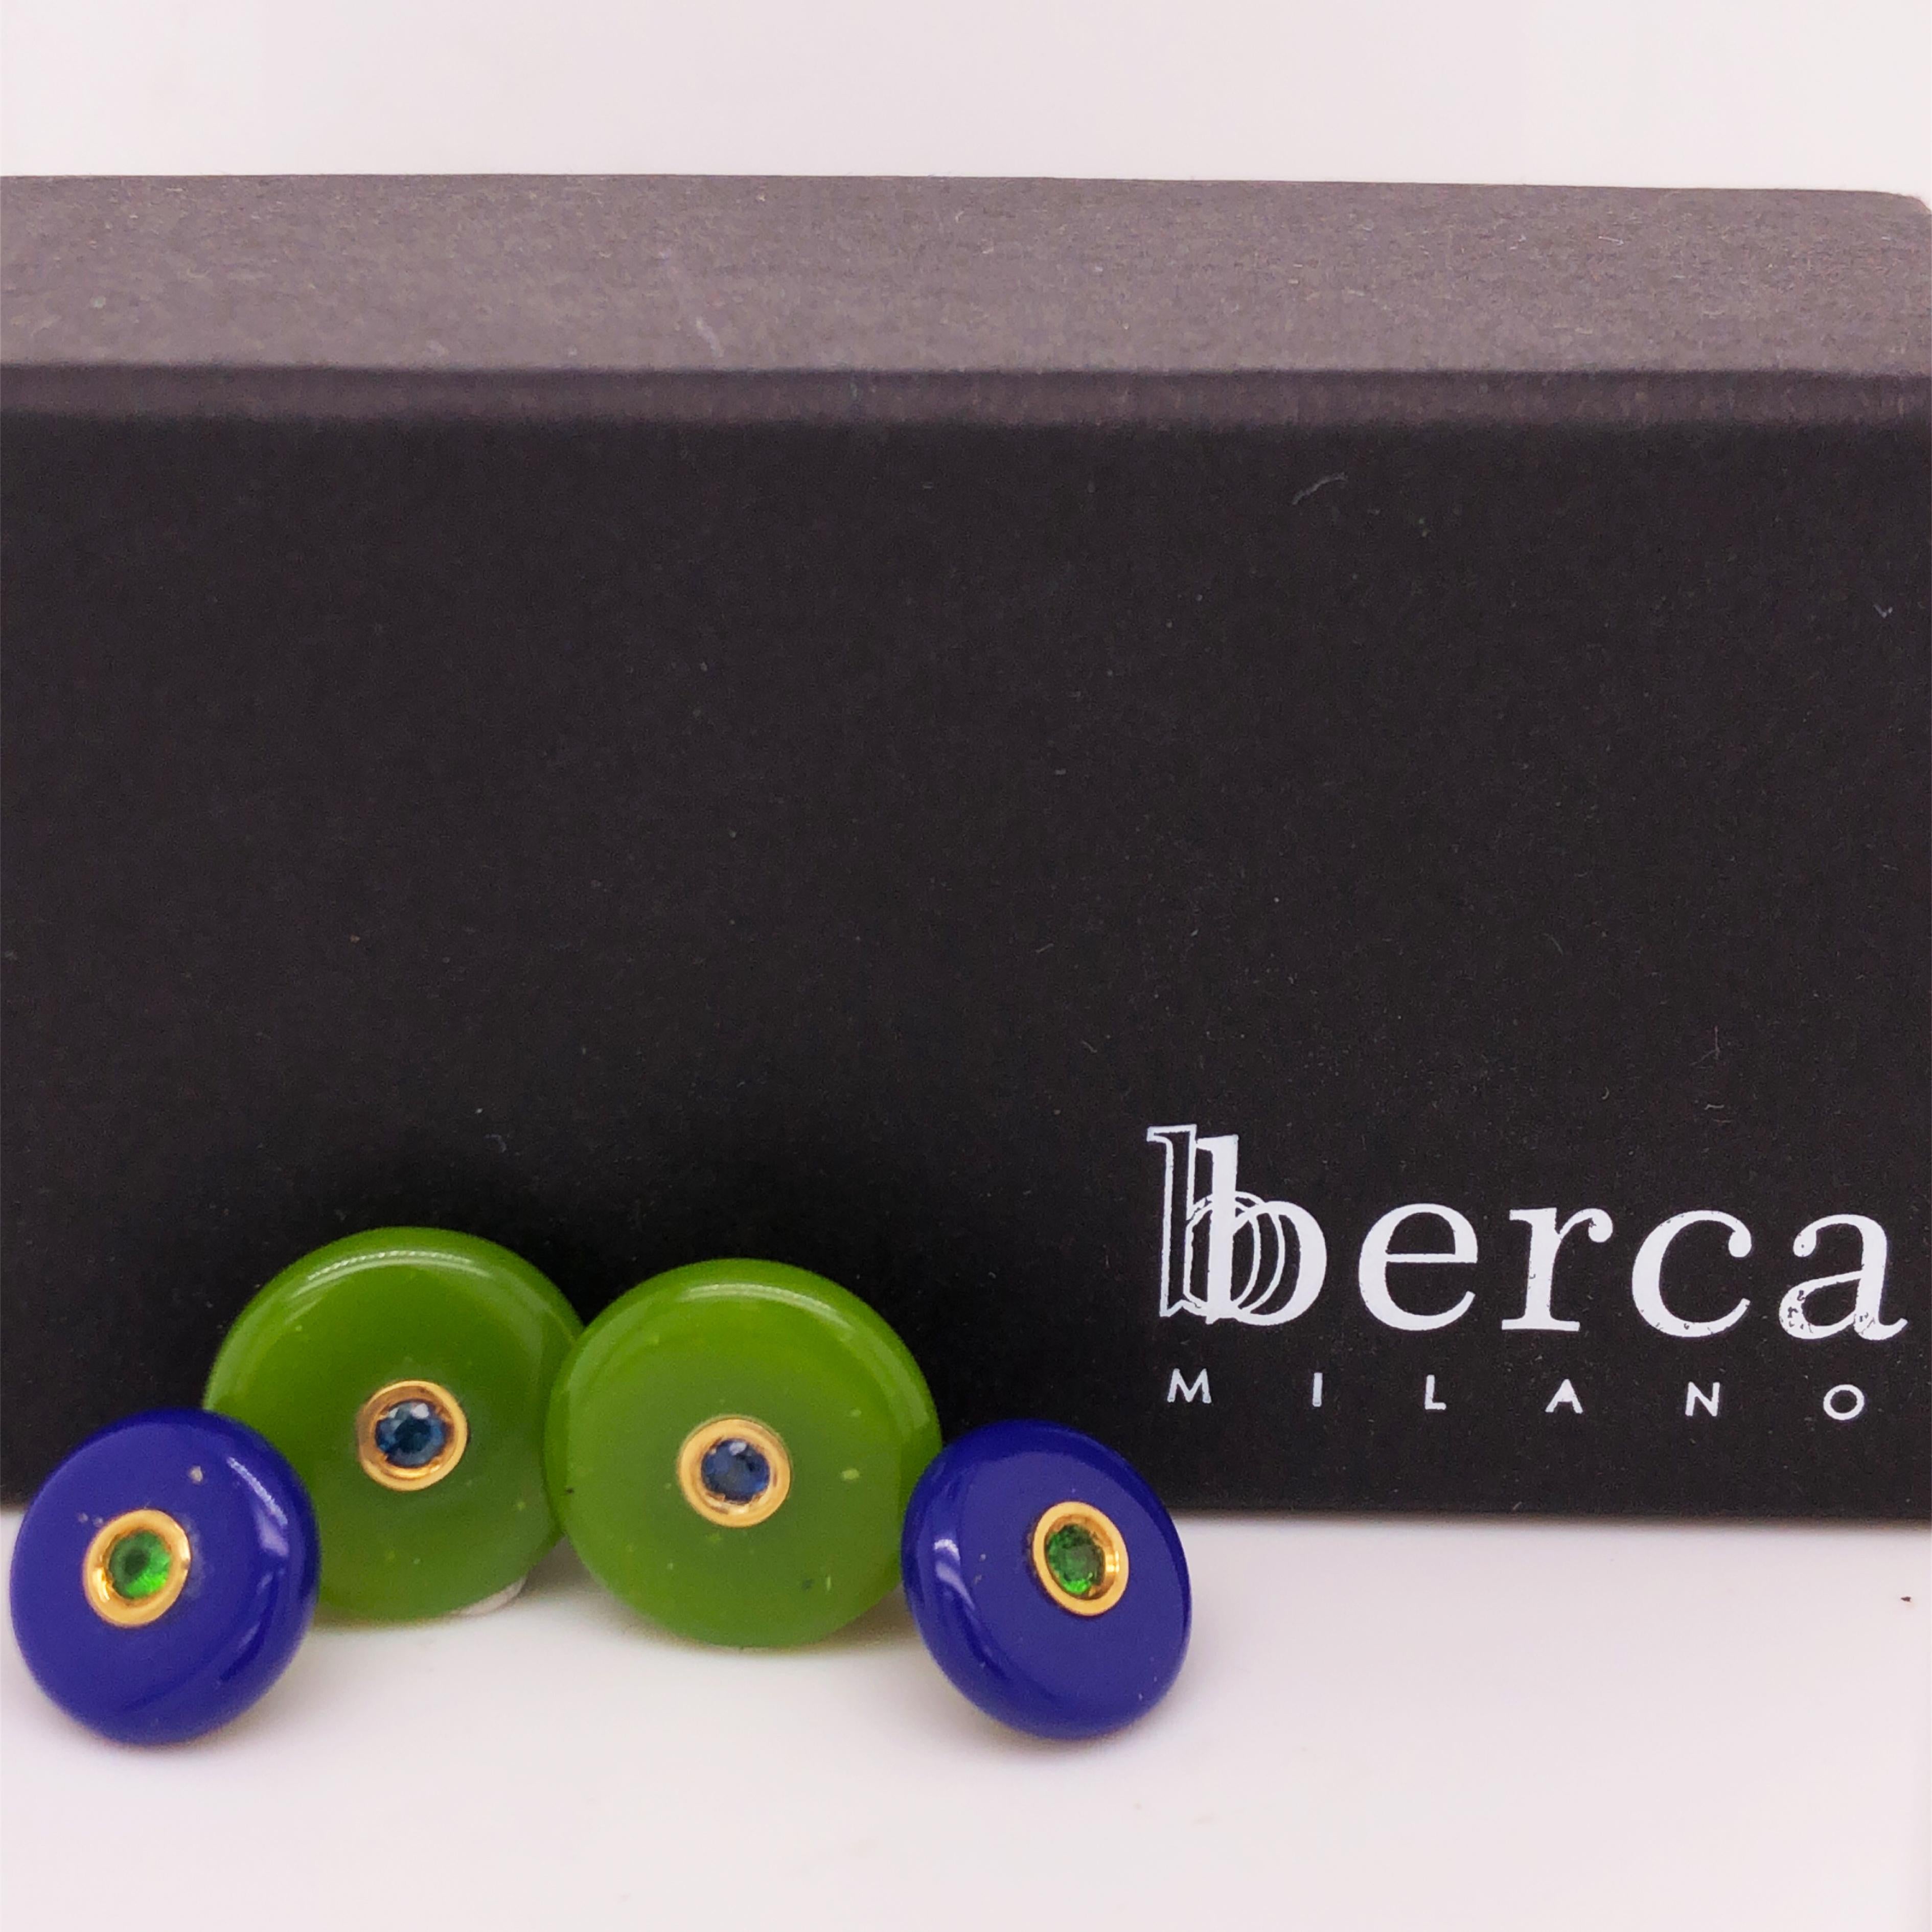 One-of-a-kind, Unique, Chic Cufflinks featuring 0.14 Carat Natural Brilliant Cut Sapphire and Emerald in a 19.50 Natural Hand Inlaid  Green Jade and Lapis-Lazuli Disk , Yellow Gold Setting.
In our Smart Leather Tobacco Case and Pouch.
All our